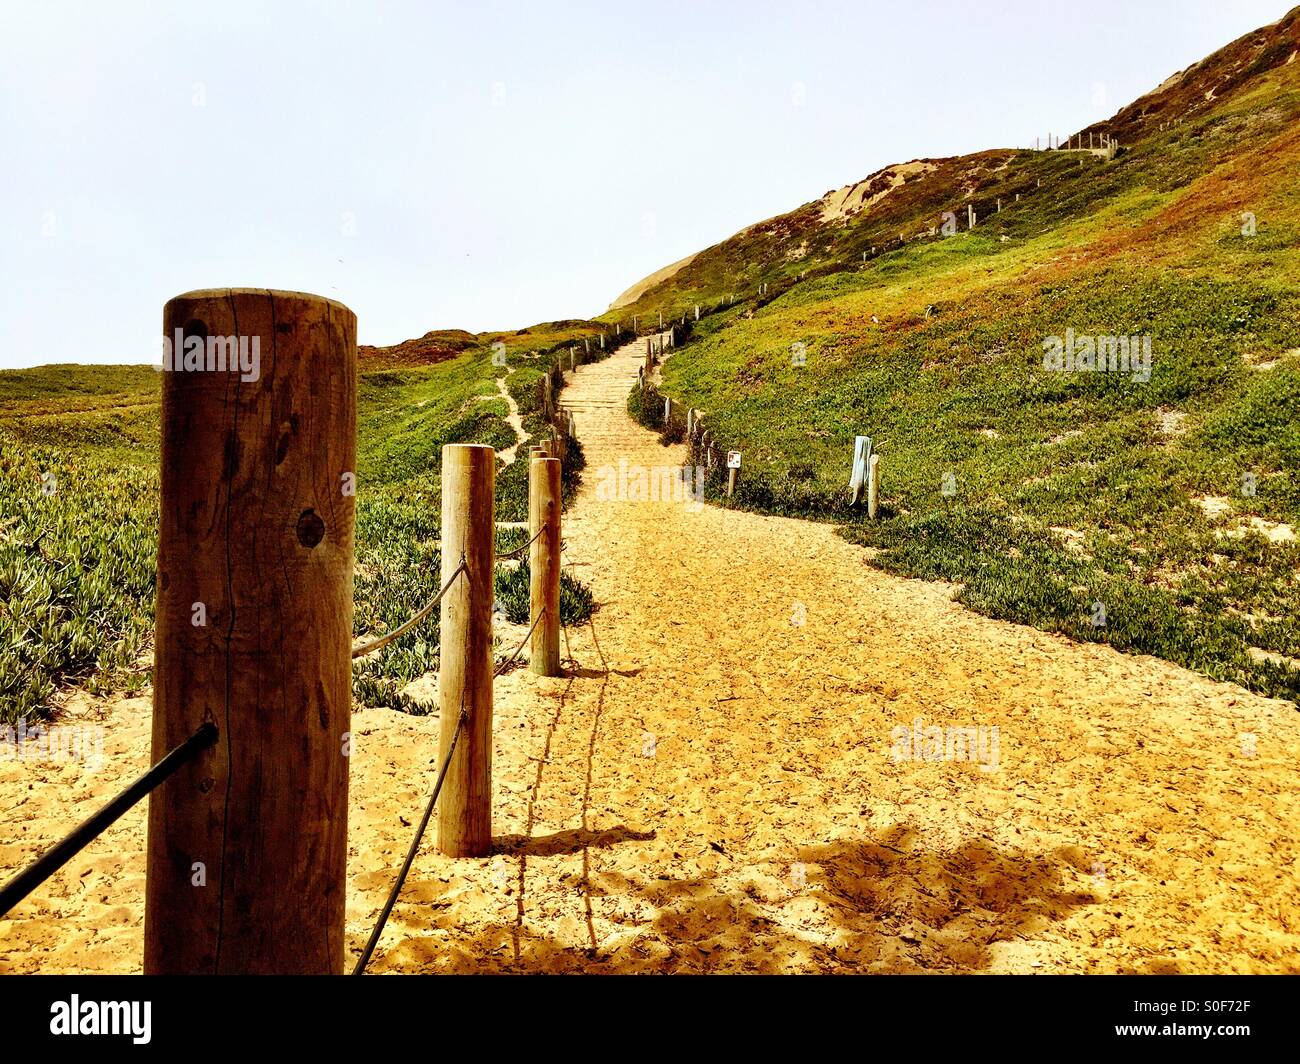 Long winding sandy path from beaches to cliffs of Fort Funston, San Francisco, CA, USA. Stock Photo